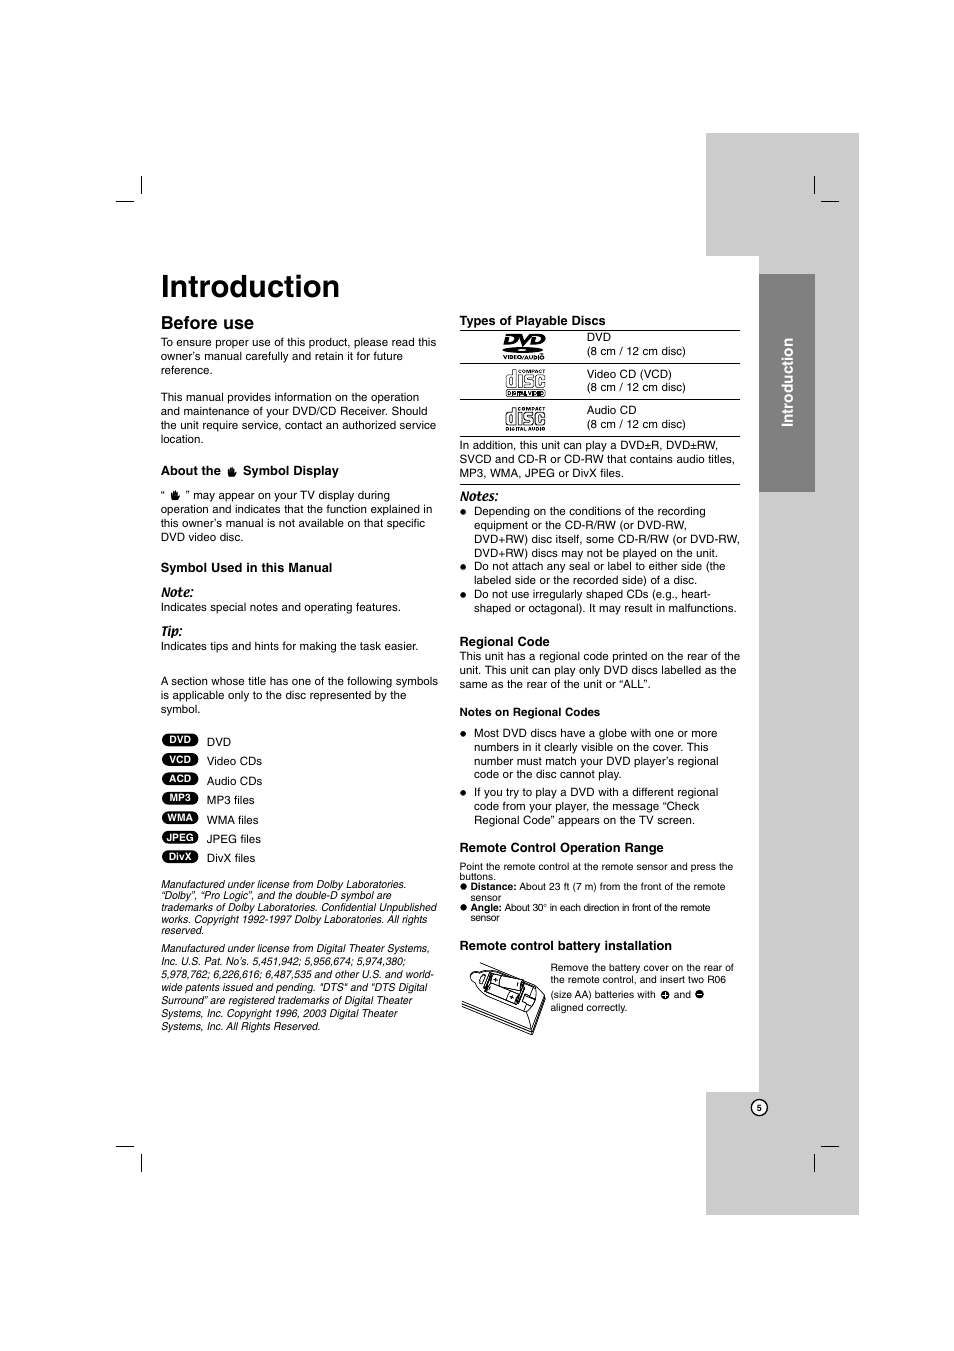 Before use, Introduction | LG SH72PZ-F User Manual | Page 5 / 28